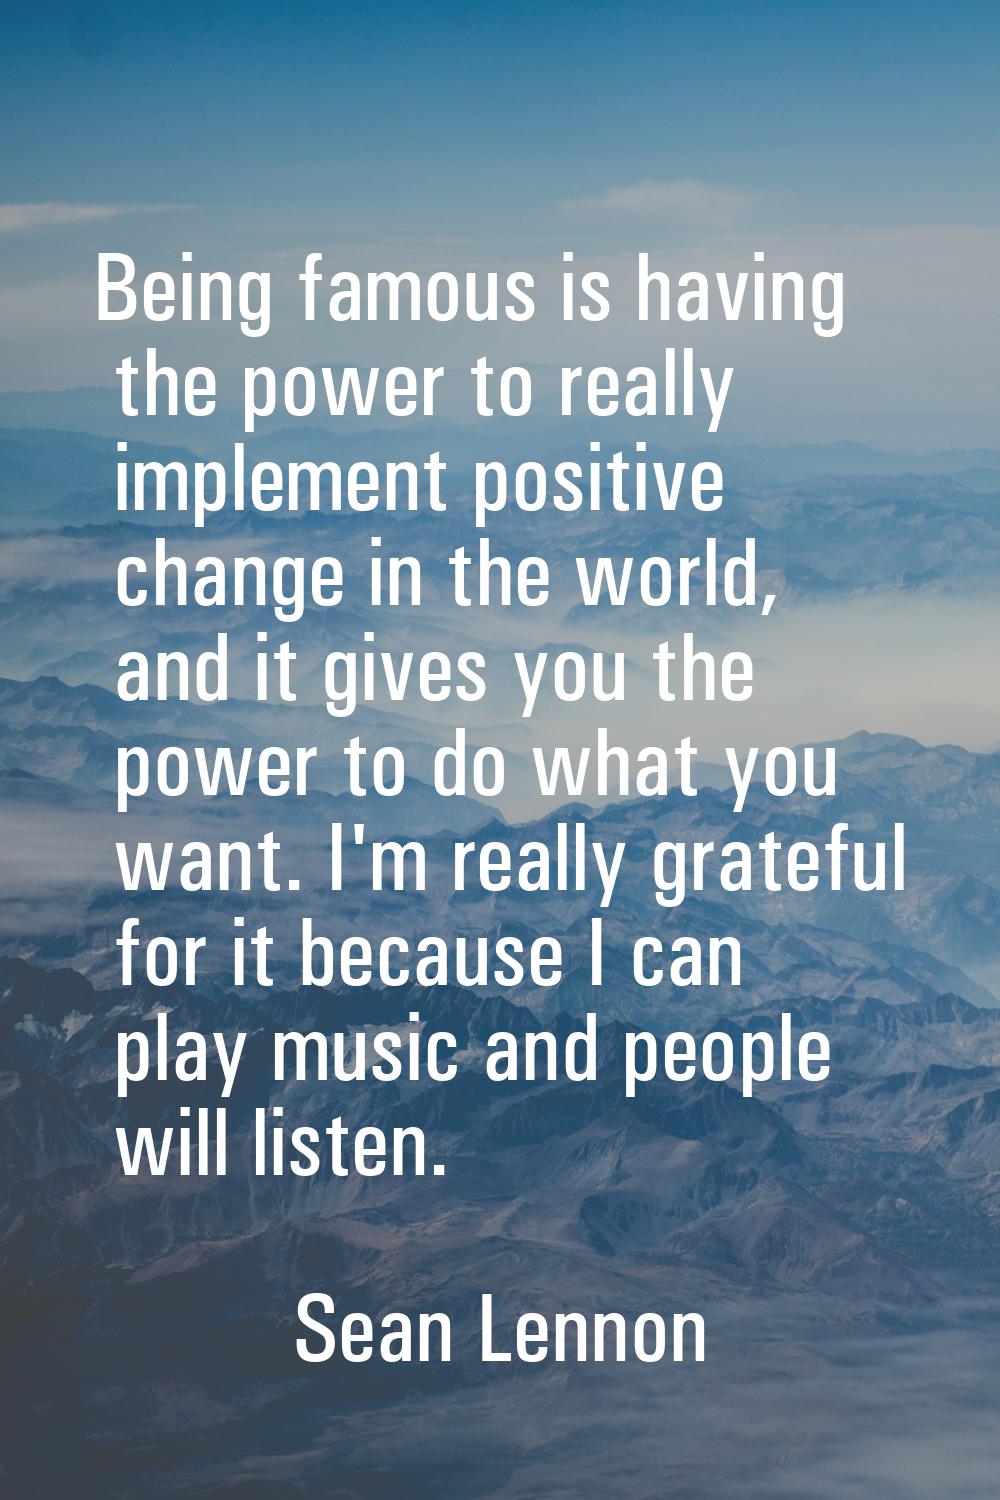 Being famous is having the power to really implement positive change in the world, and it gives you